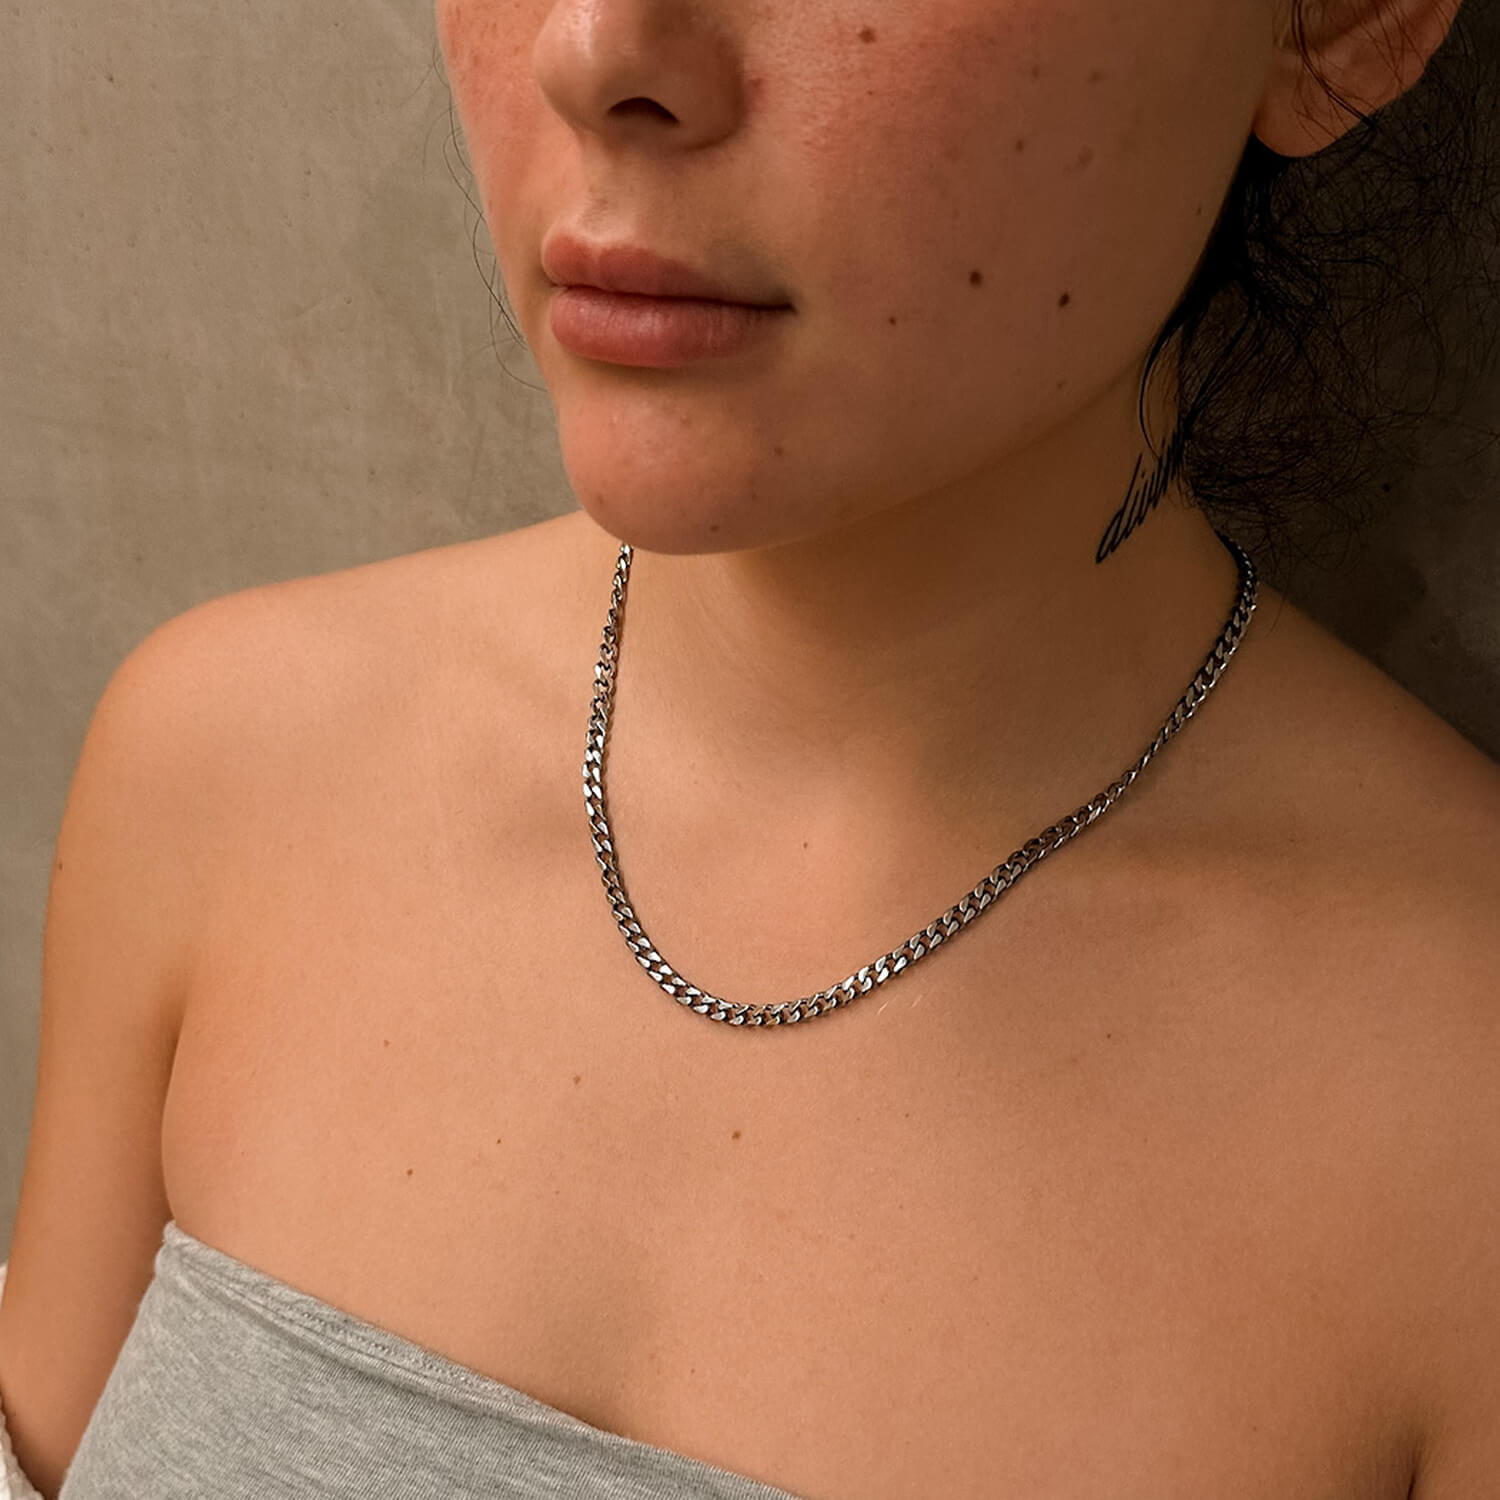 female wearing 5mm silver cuban link chain on neck